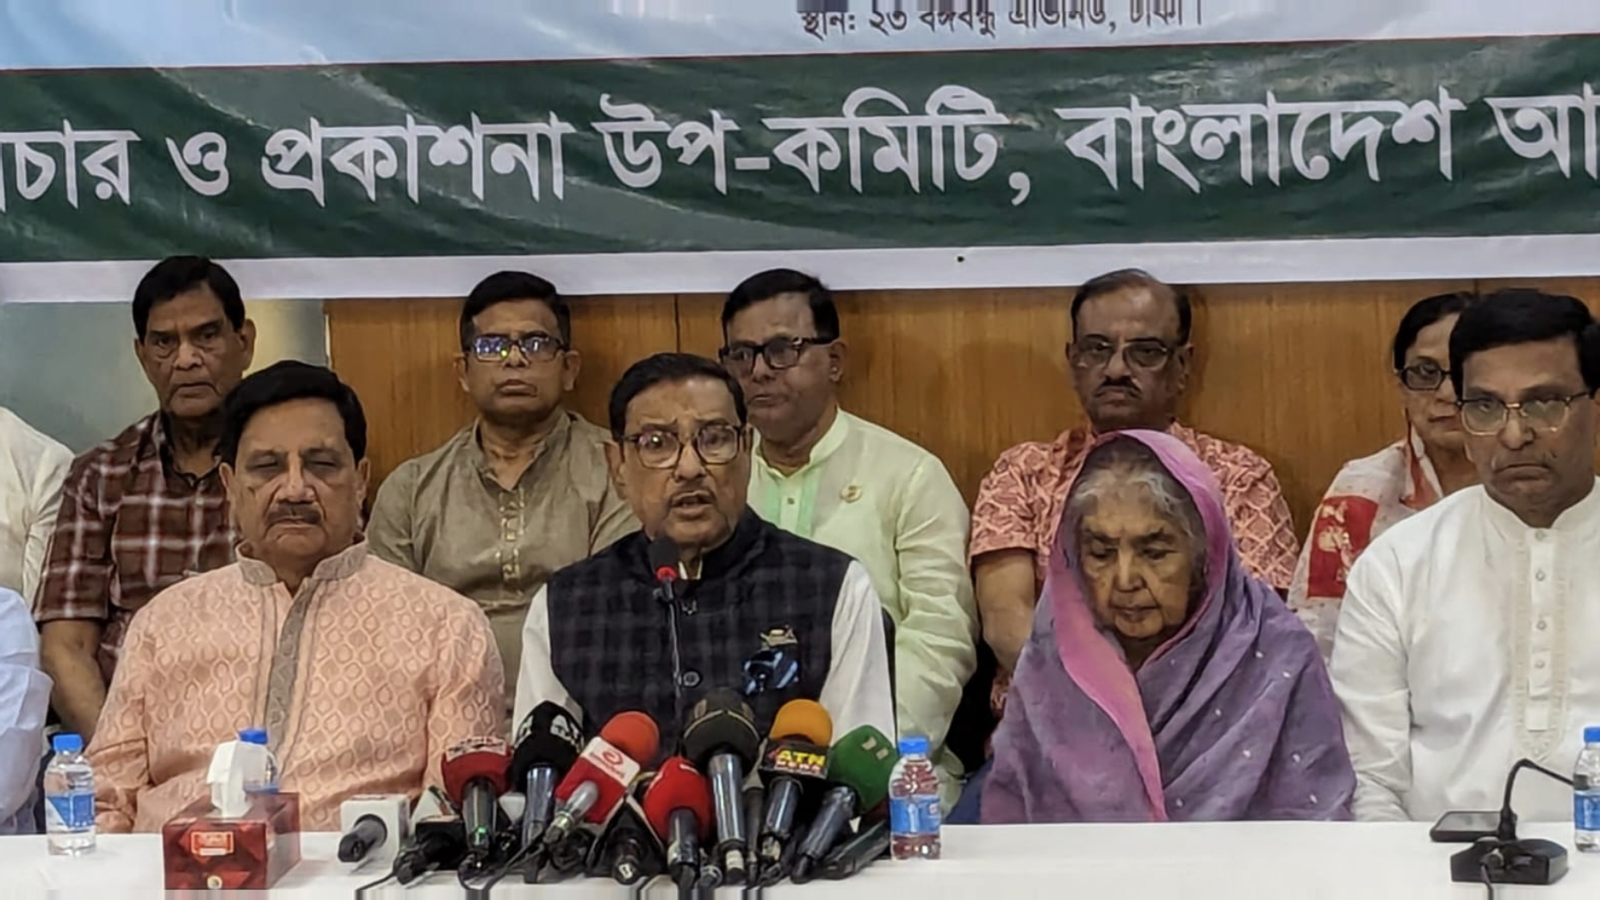 Foreign and domestic vested quarters conspiring to topple democratically elected govt: Quader